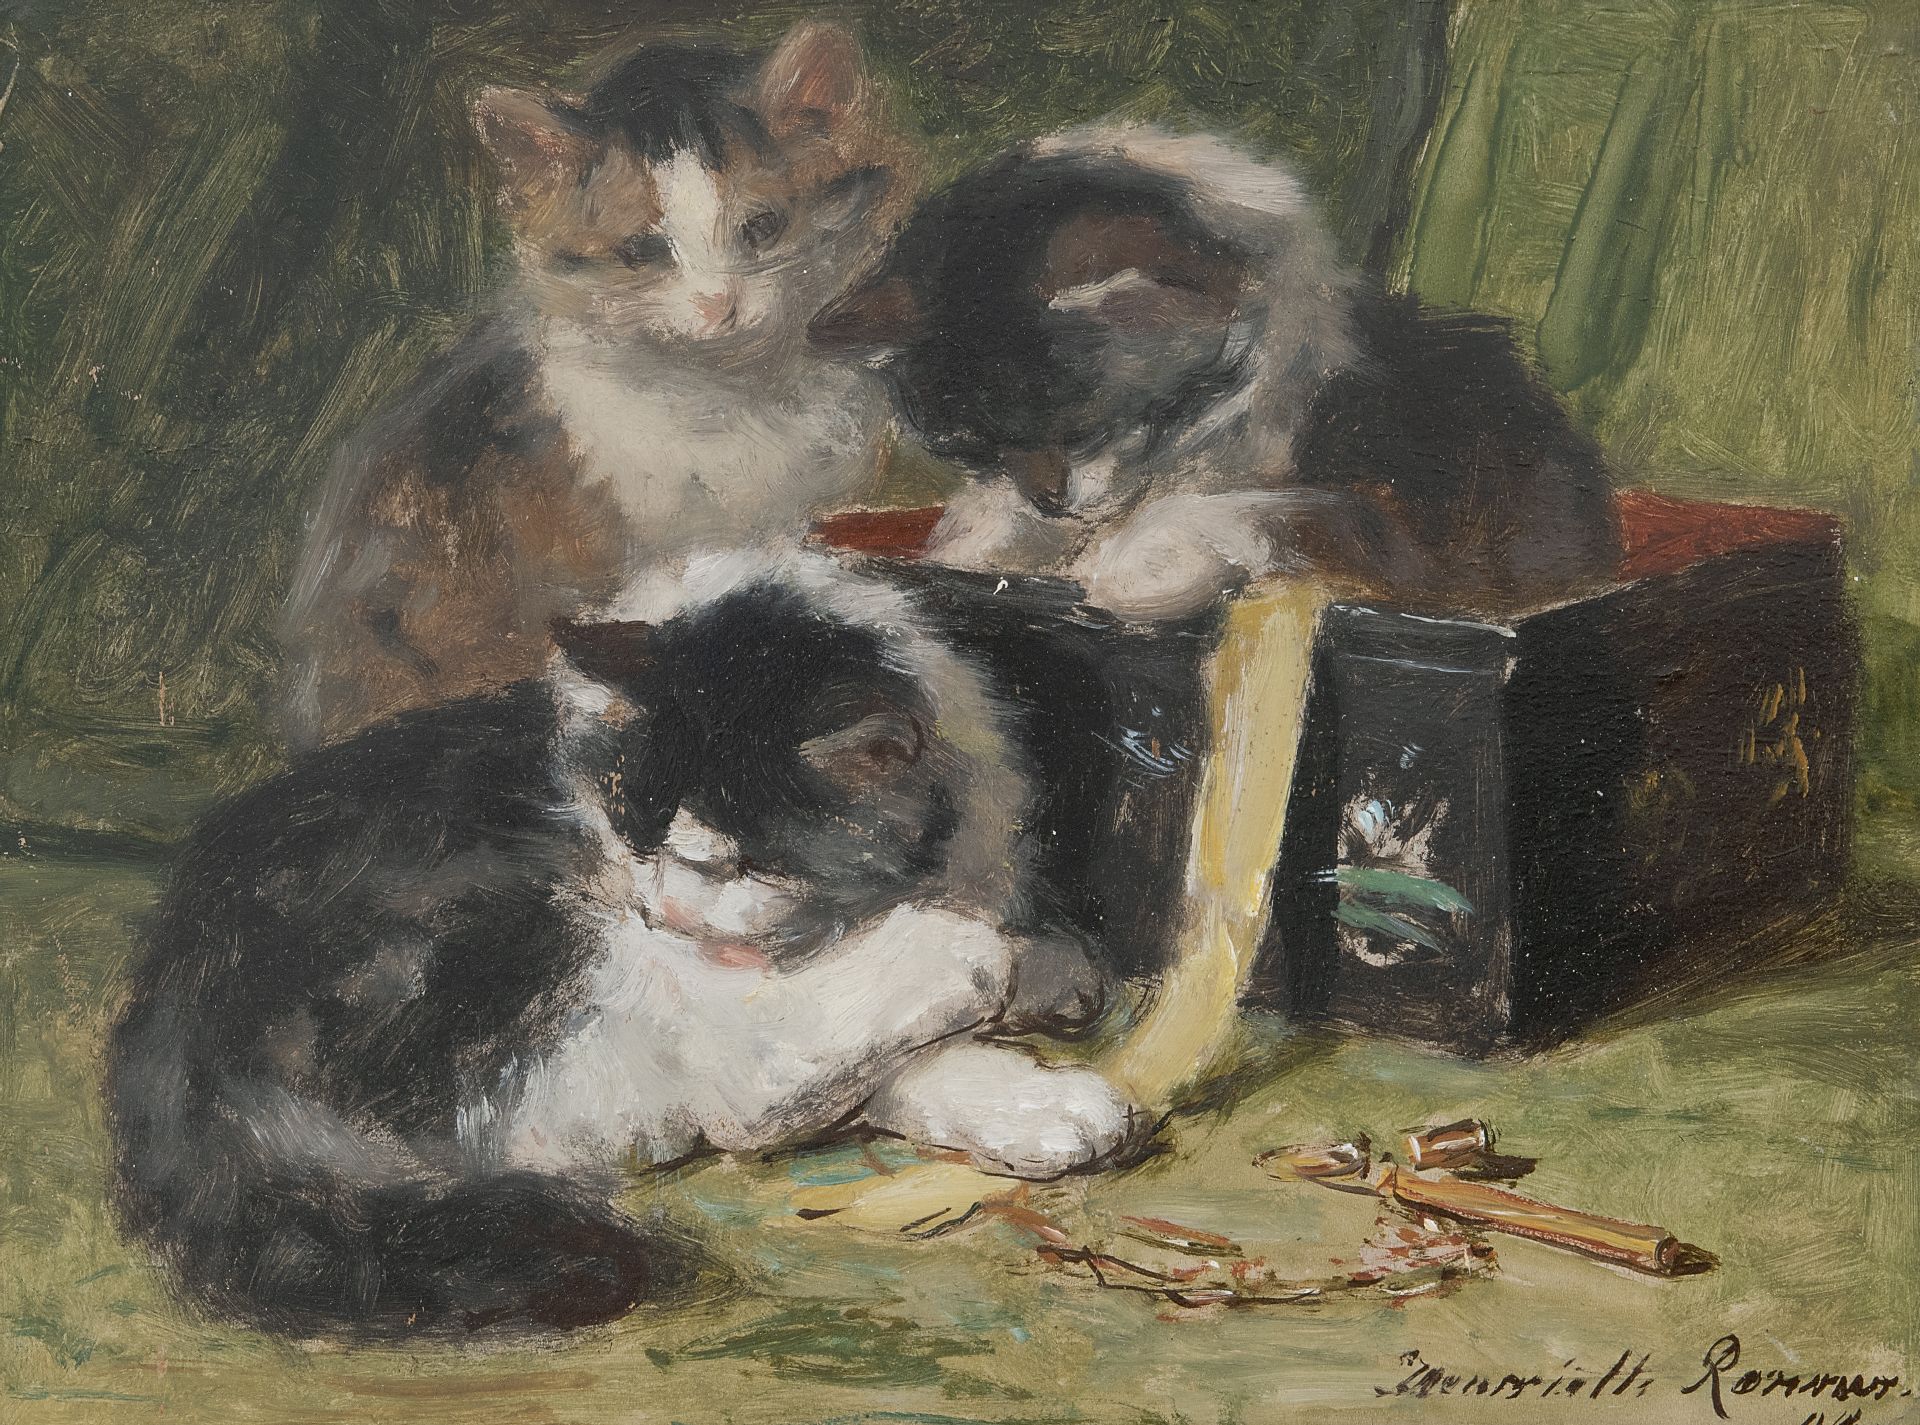 Henriette Ronner | Paintings prev. for Sale | Kittens playing with a ...